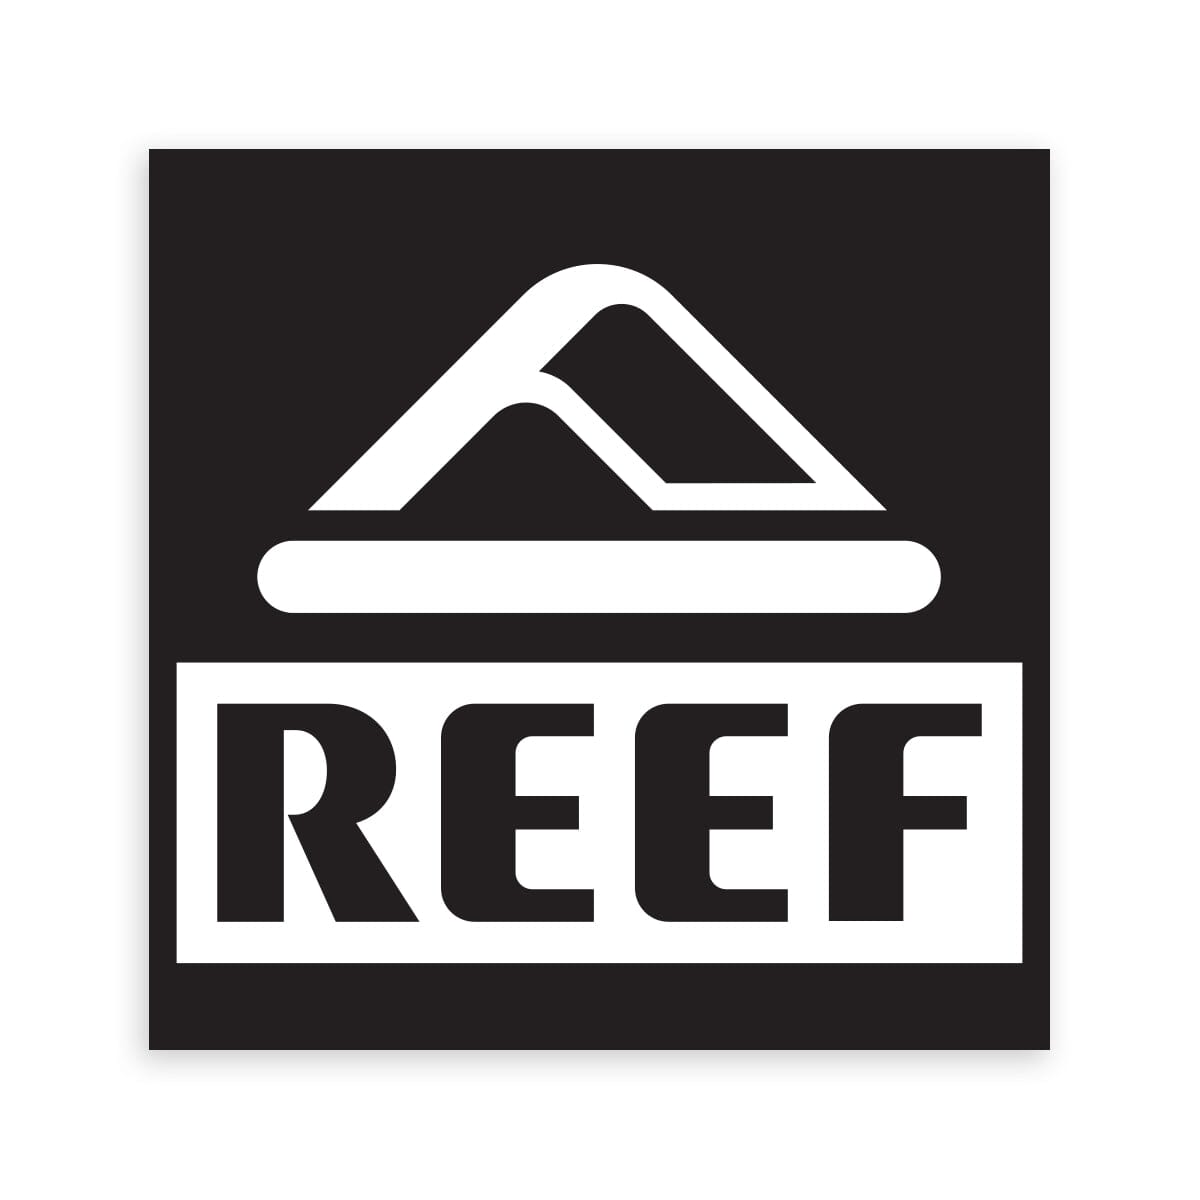 Reef Magnets Magnets Sticker Mule 3 inch 